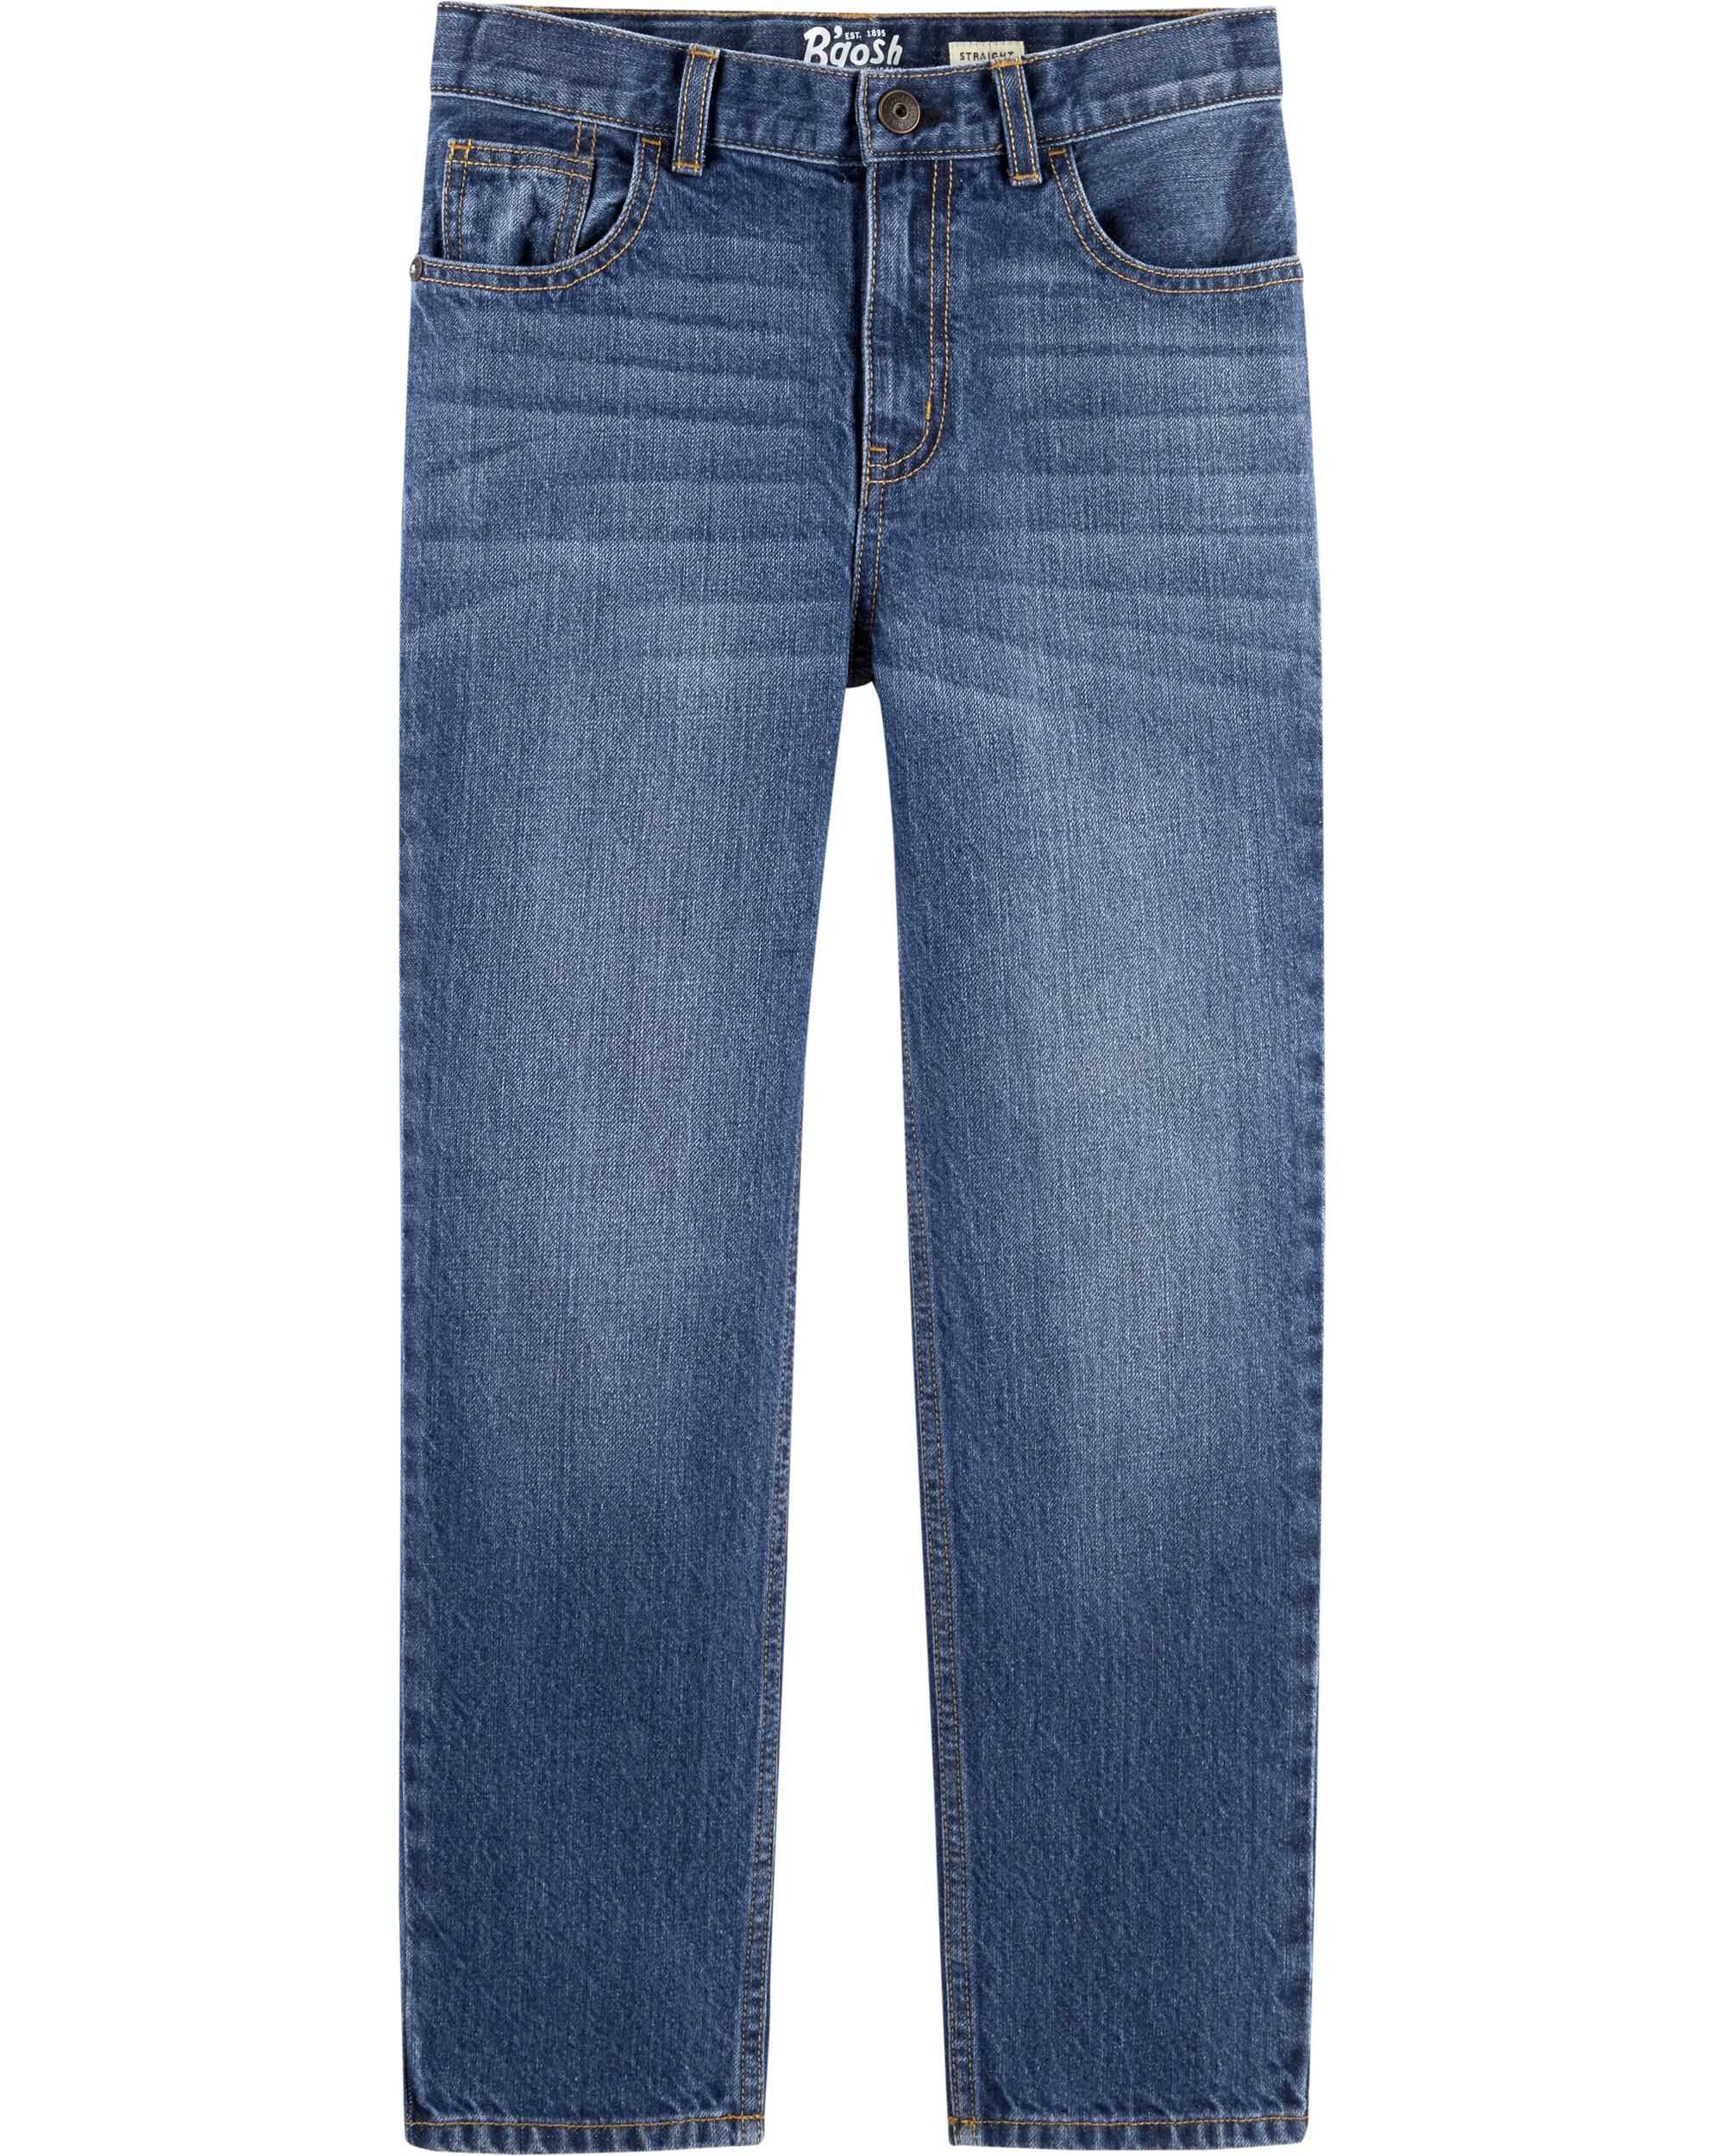 Carters Straight Jeans in Anchor Dark